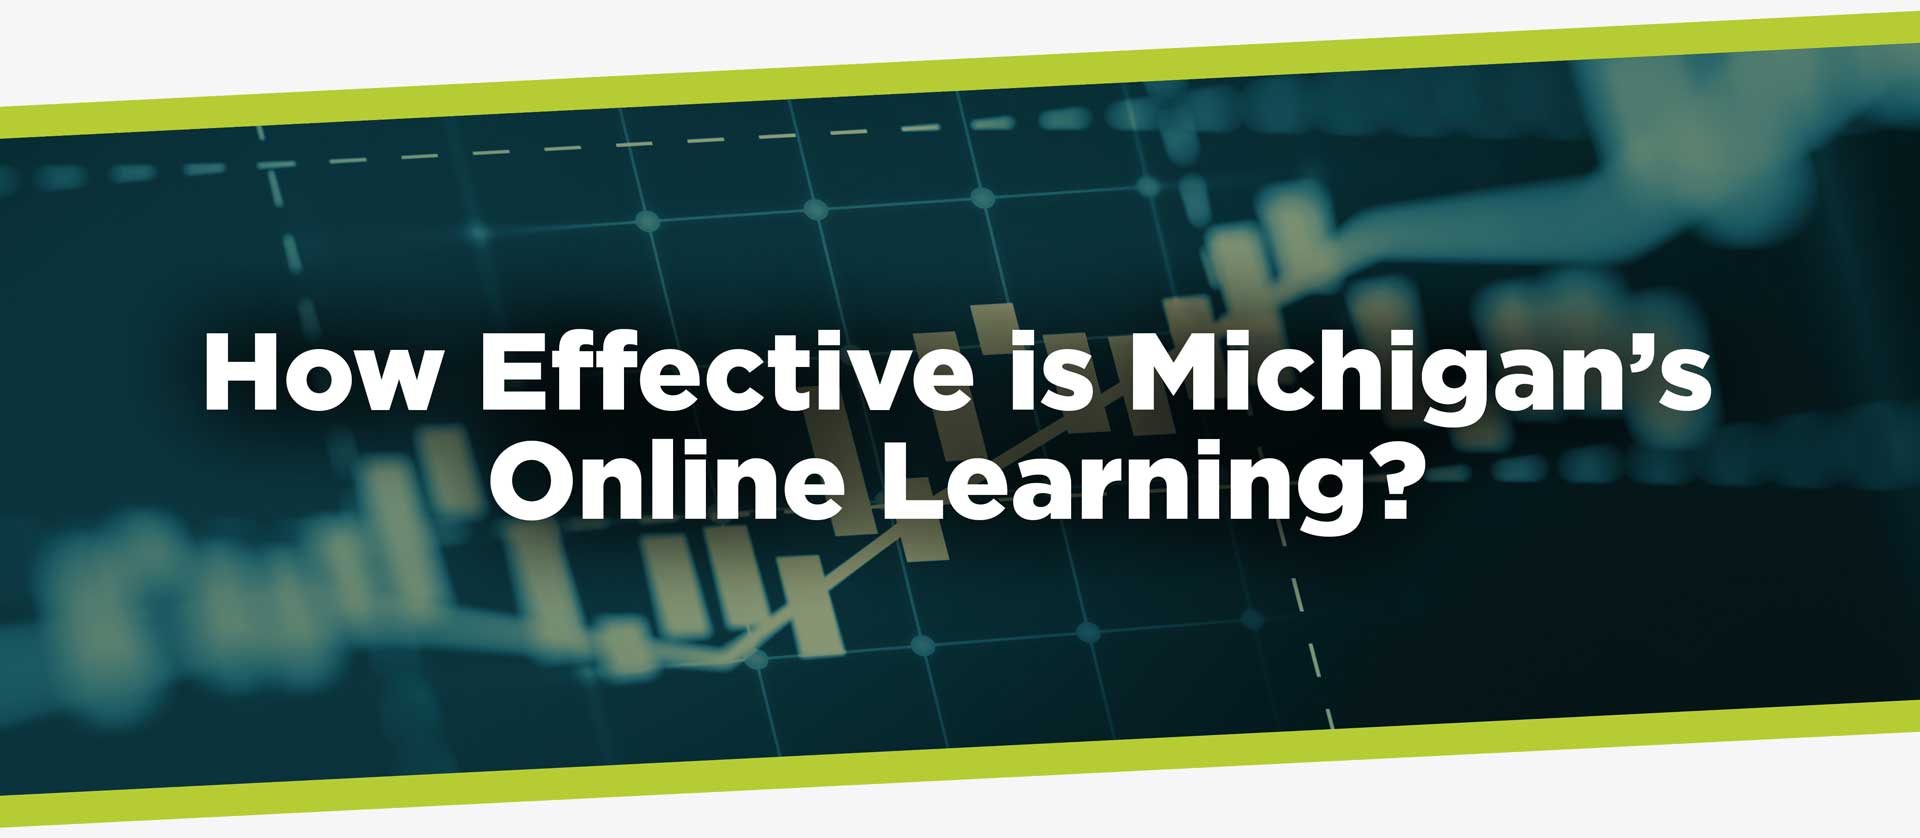 How Effective is Michigan's Online Learning?